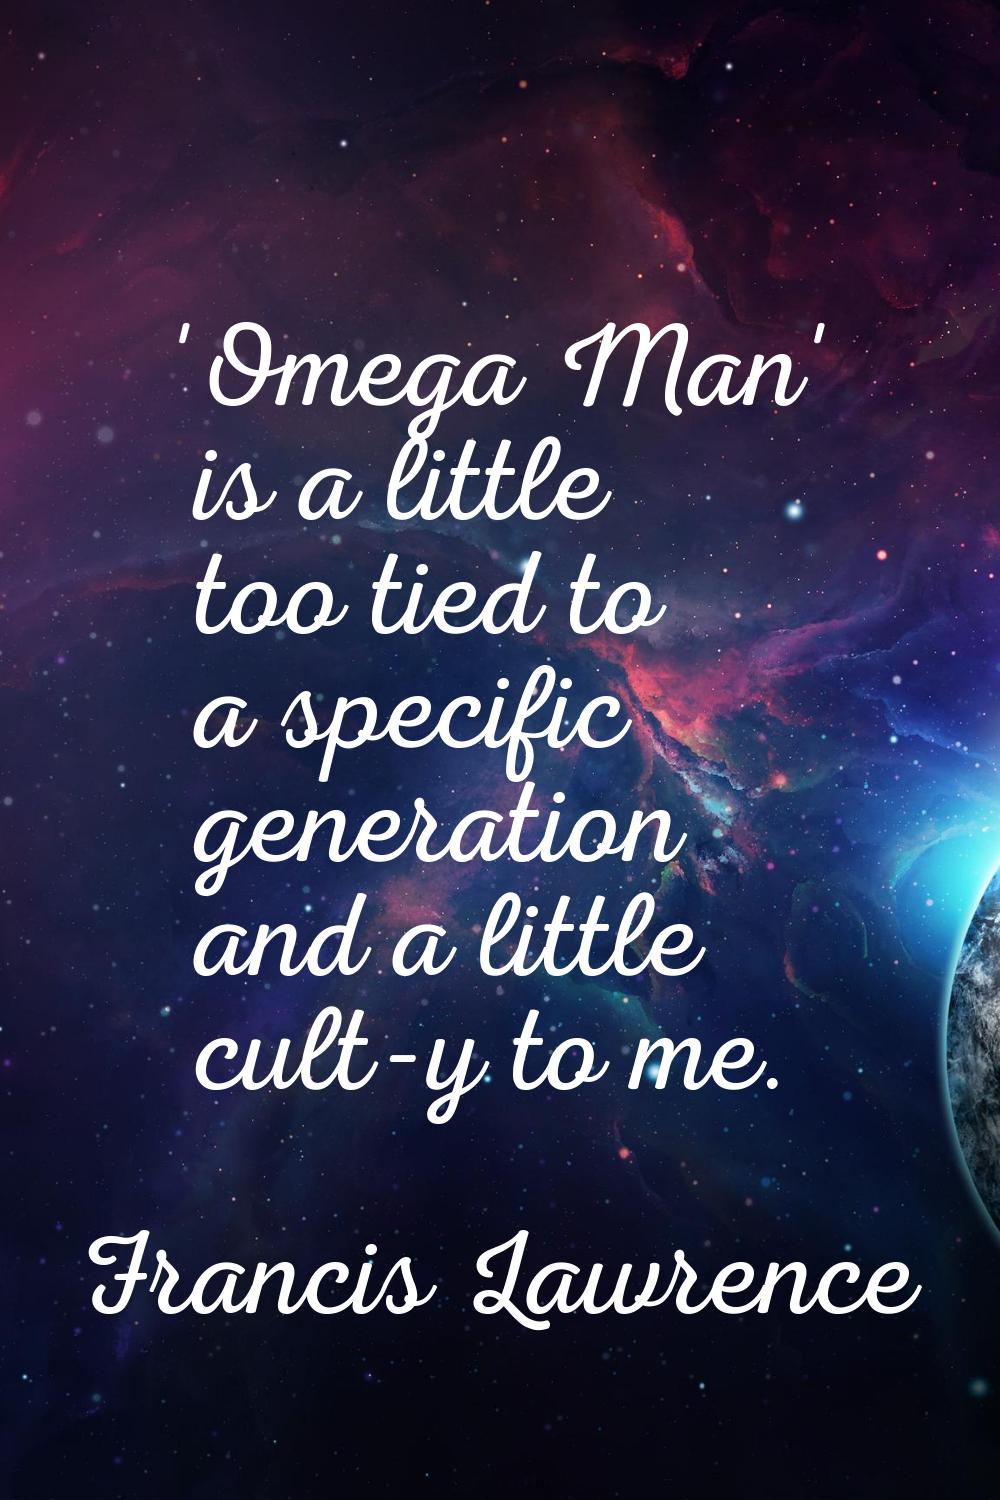 'Omega Man' is a little too tied to a specific generation and a little cult-y to me.